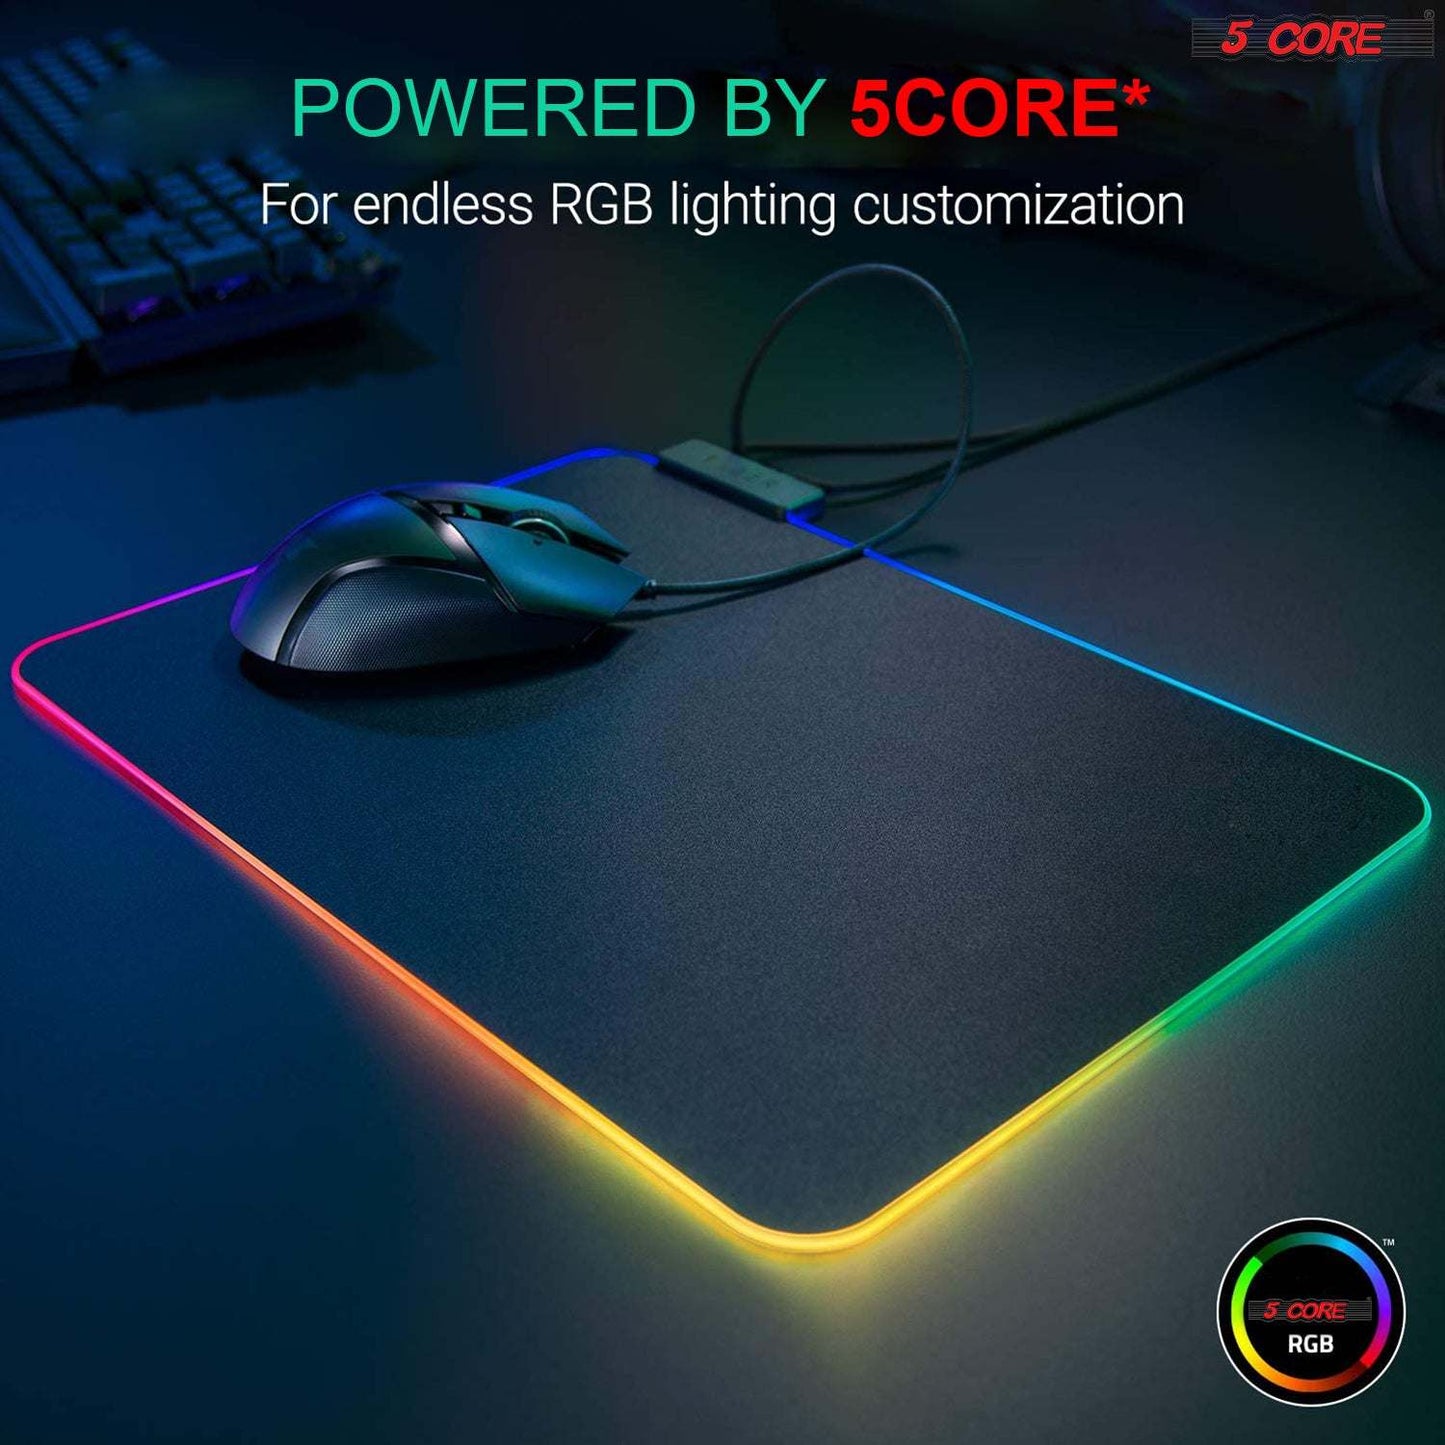 Products Mouse Pad Gaming Large Mousepad RGB LED Desk Mouse Mat Laptop PC Computer Notebook Glowing 12 Modes 5 Core MP 300